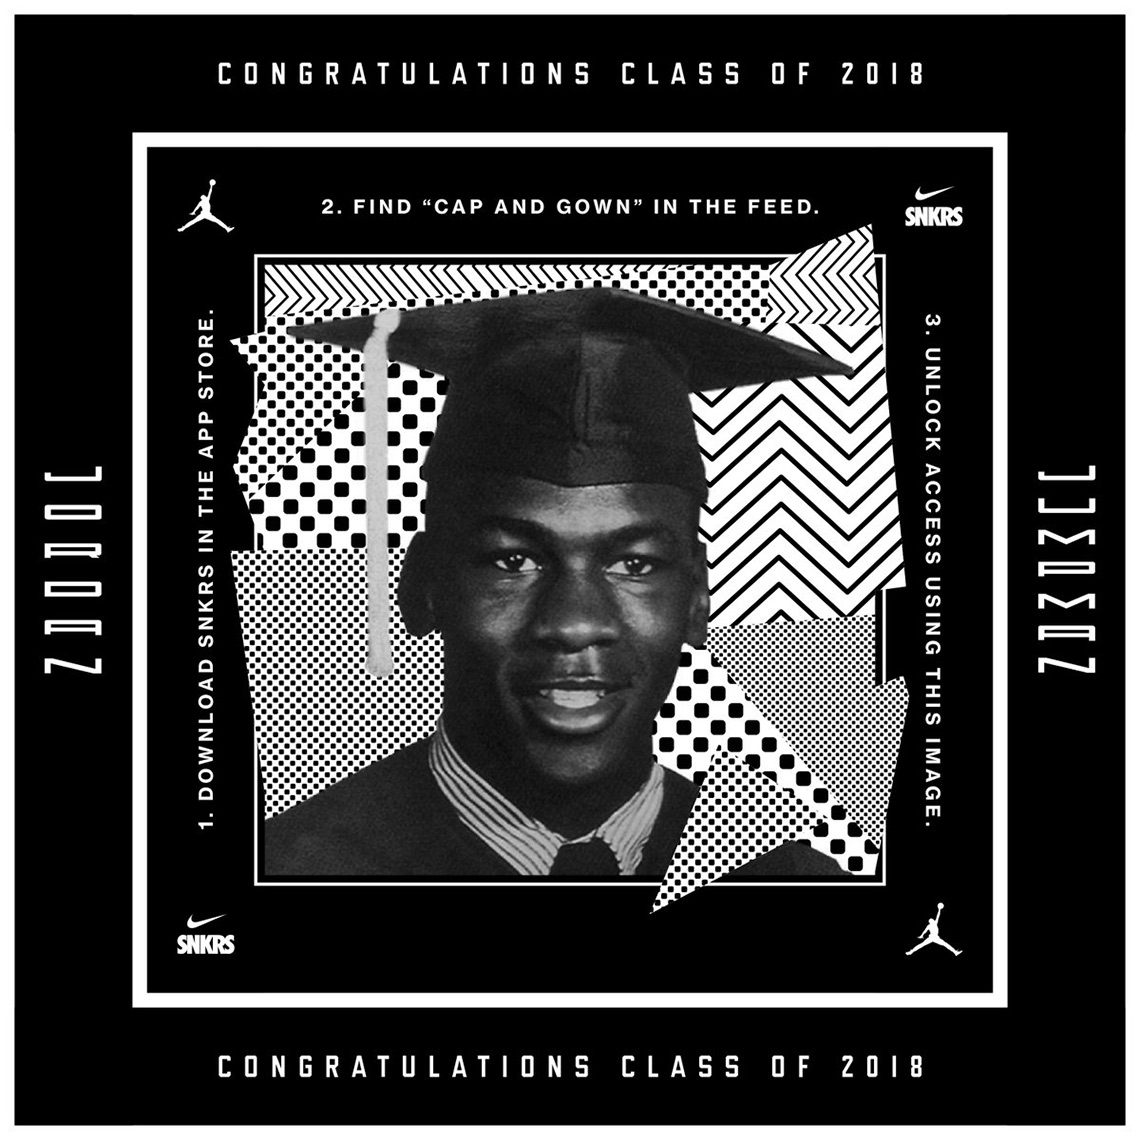 Nike Air Jordan 11 Cap and Gown Is the Brands Most Formal Drop